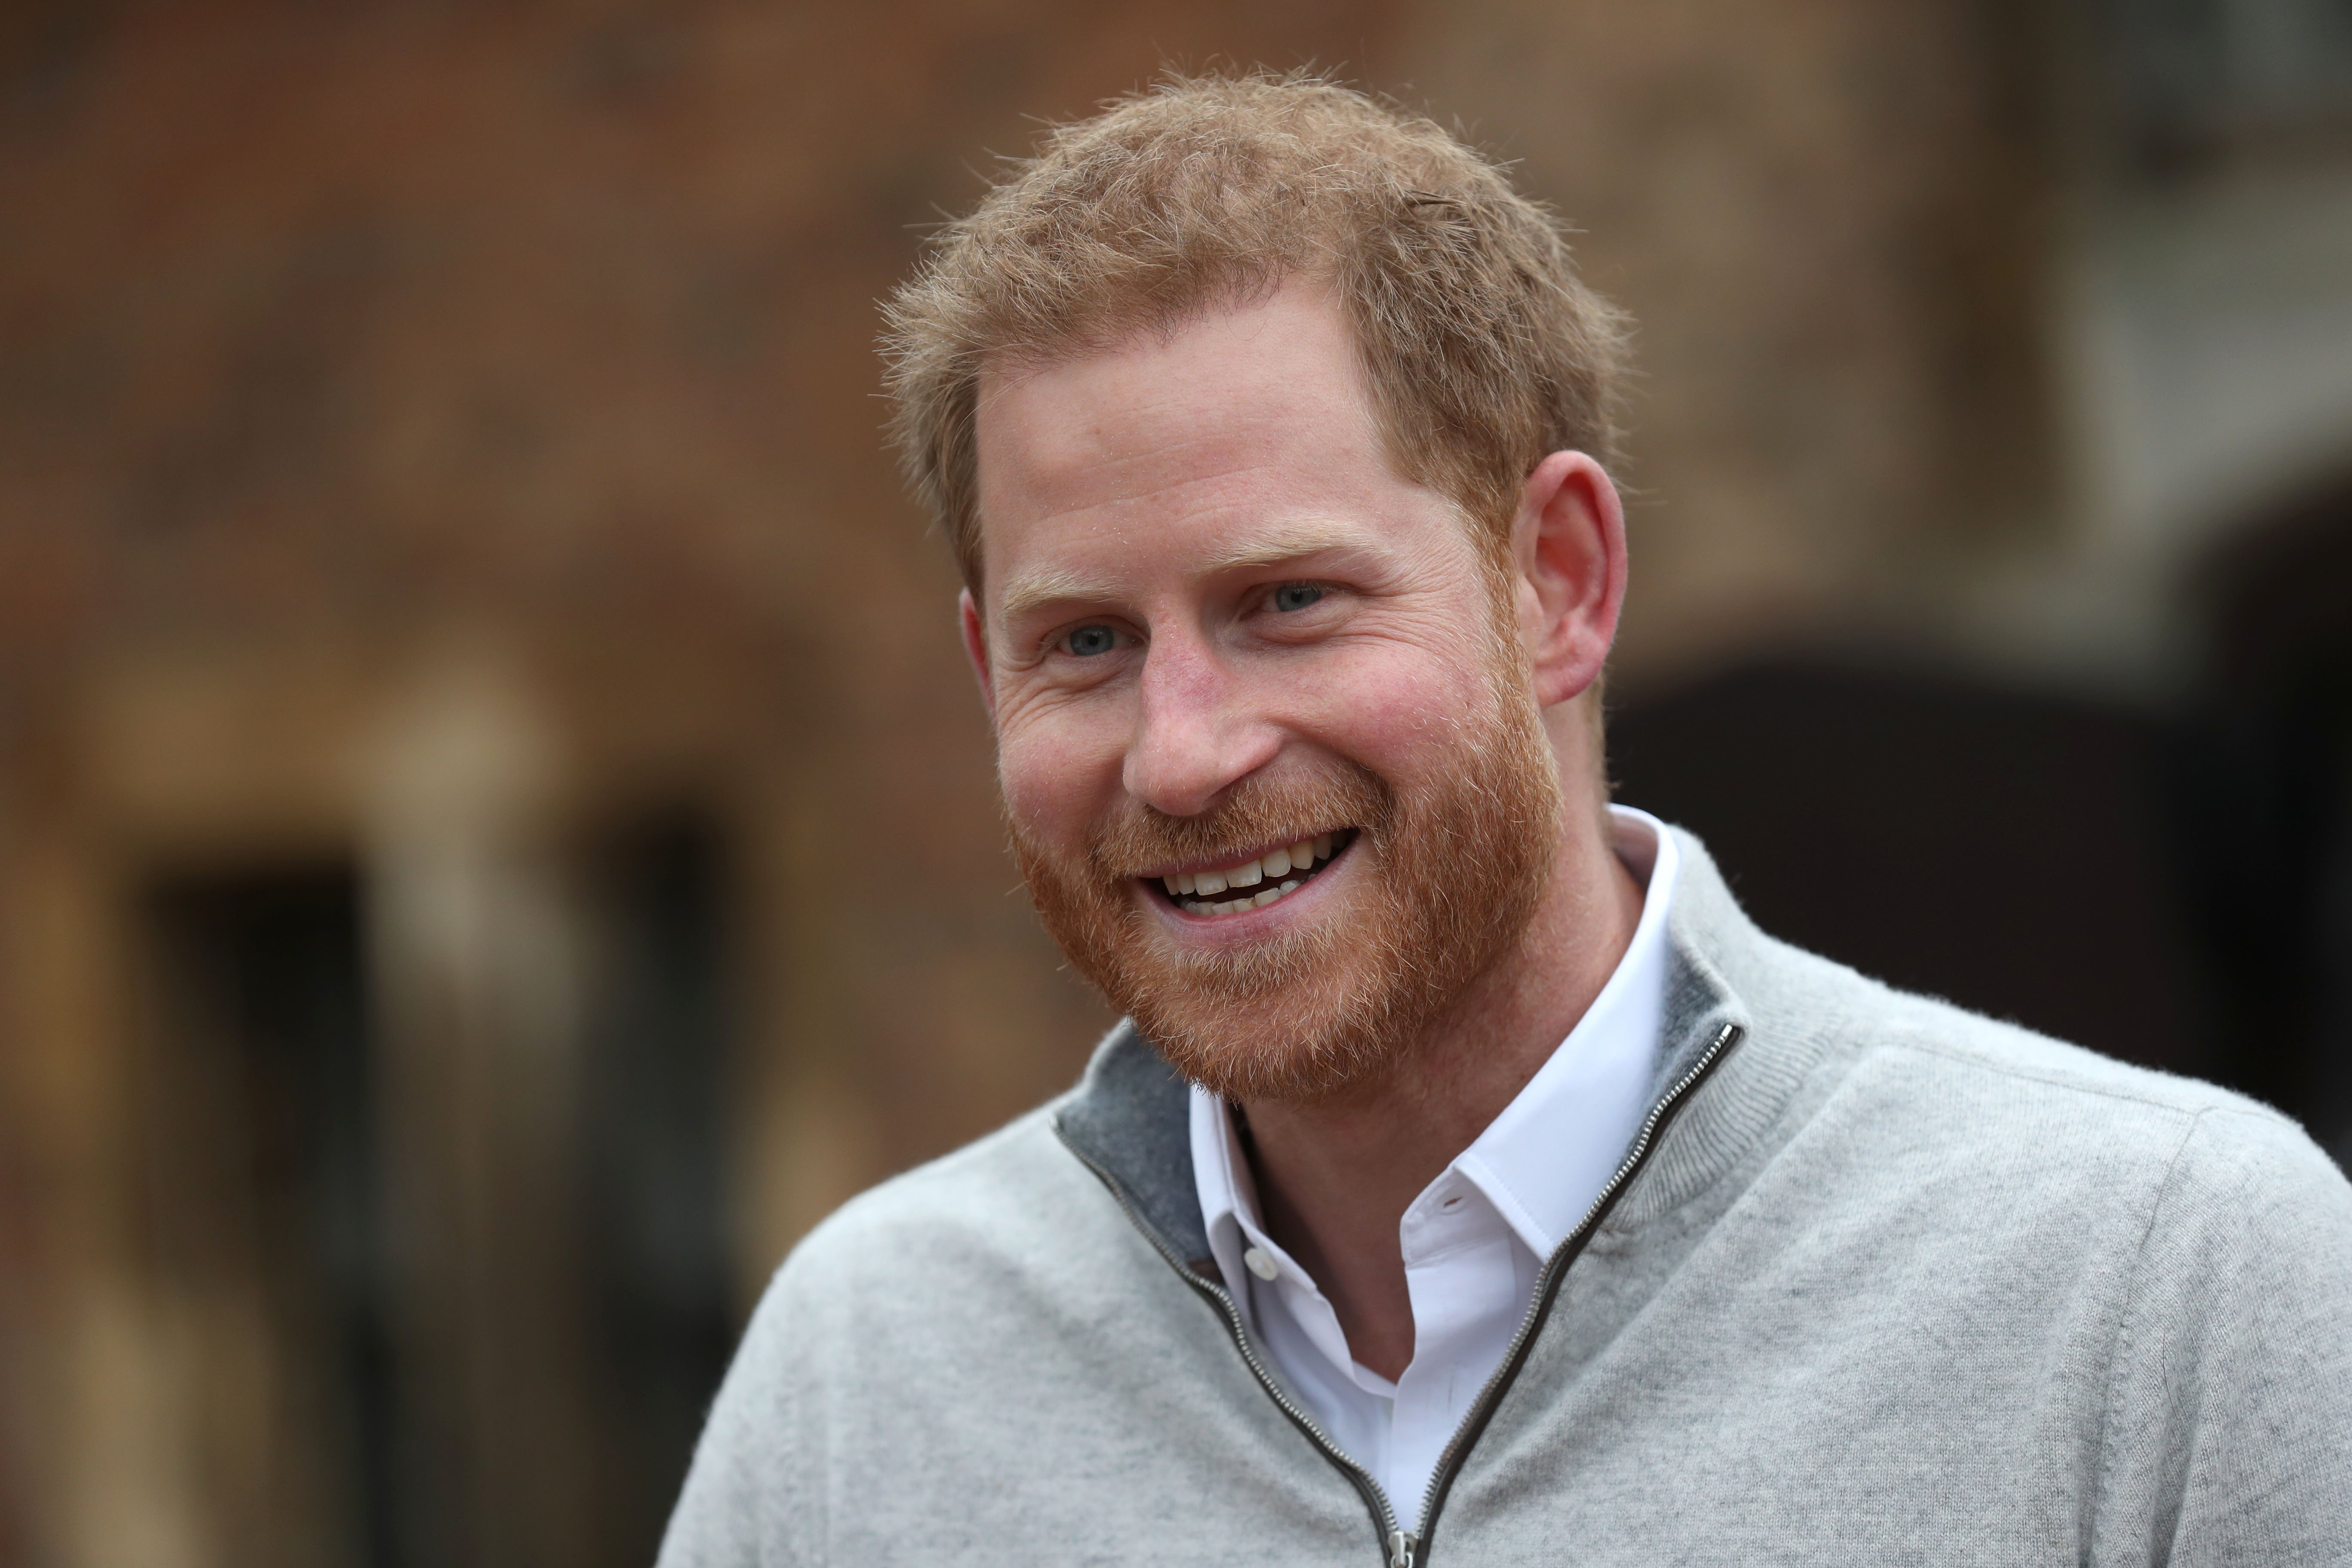 Prince Harry, Duke of Sussex during an interview with the media at Windsor Castle following the birth of his son on May 06, 2019 in Windsor, United Kingdom. | Source: Getty Images